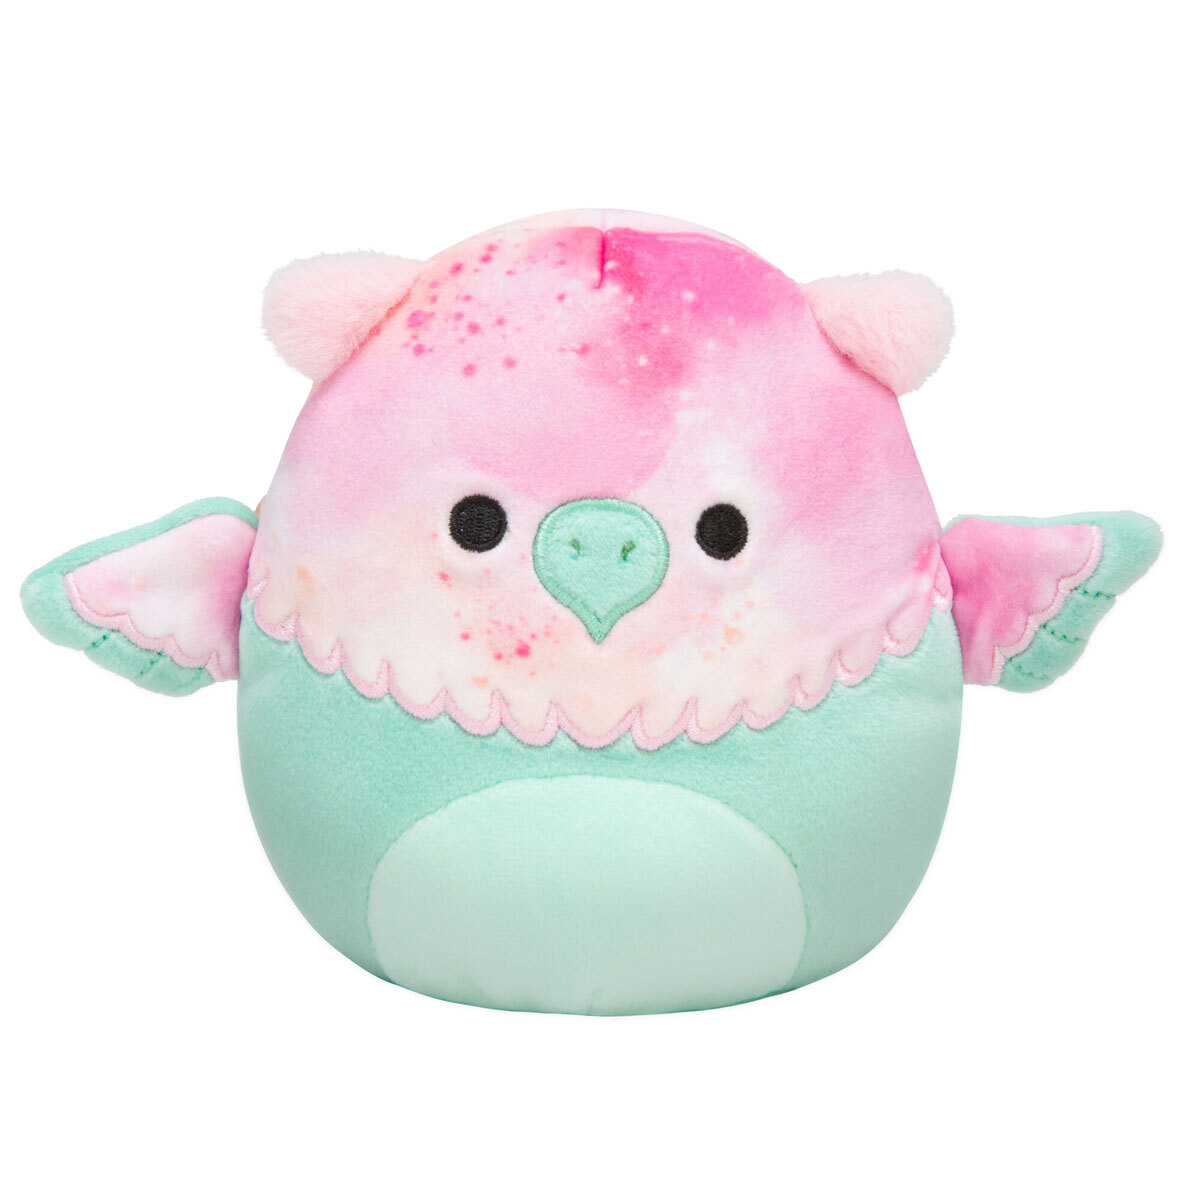 https://www.firestormgames.co.uk/uploads/images/Product%20Images/Toys/Squishmallows/SQJW22-75FD-12.jpg